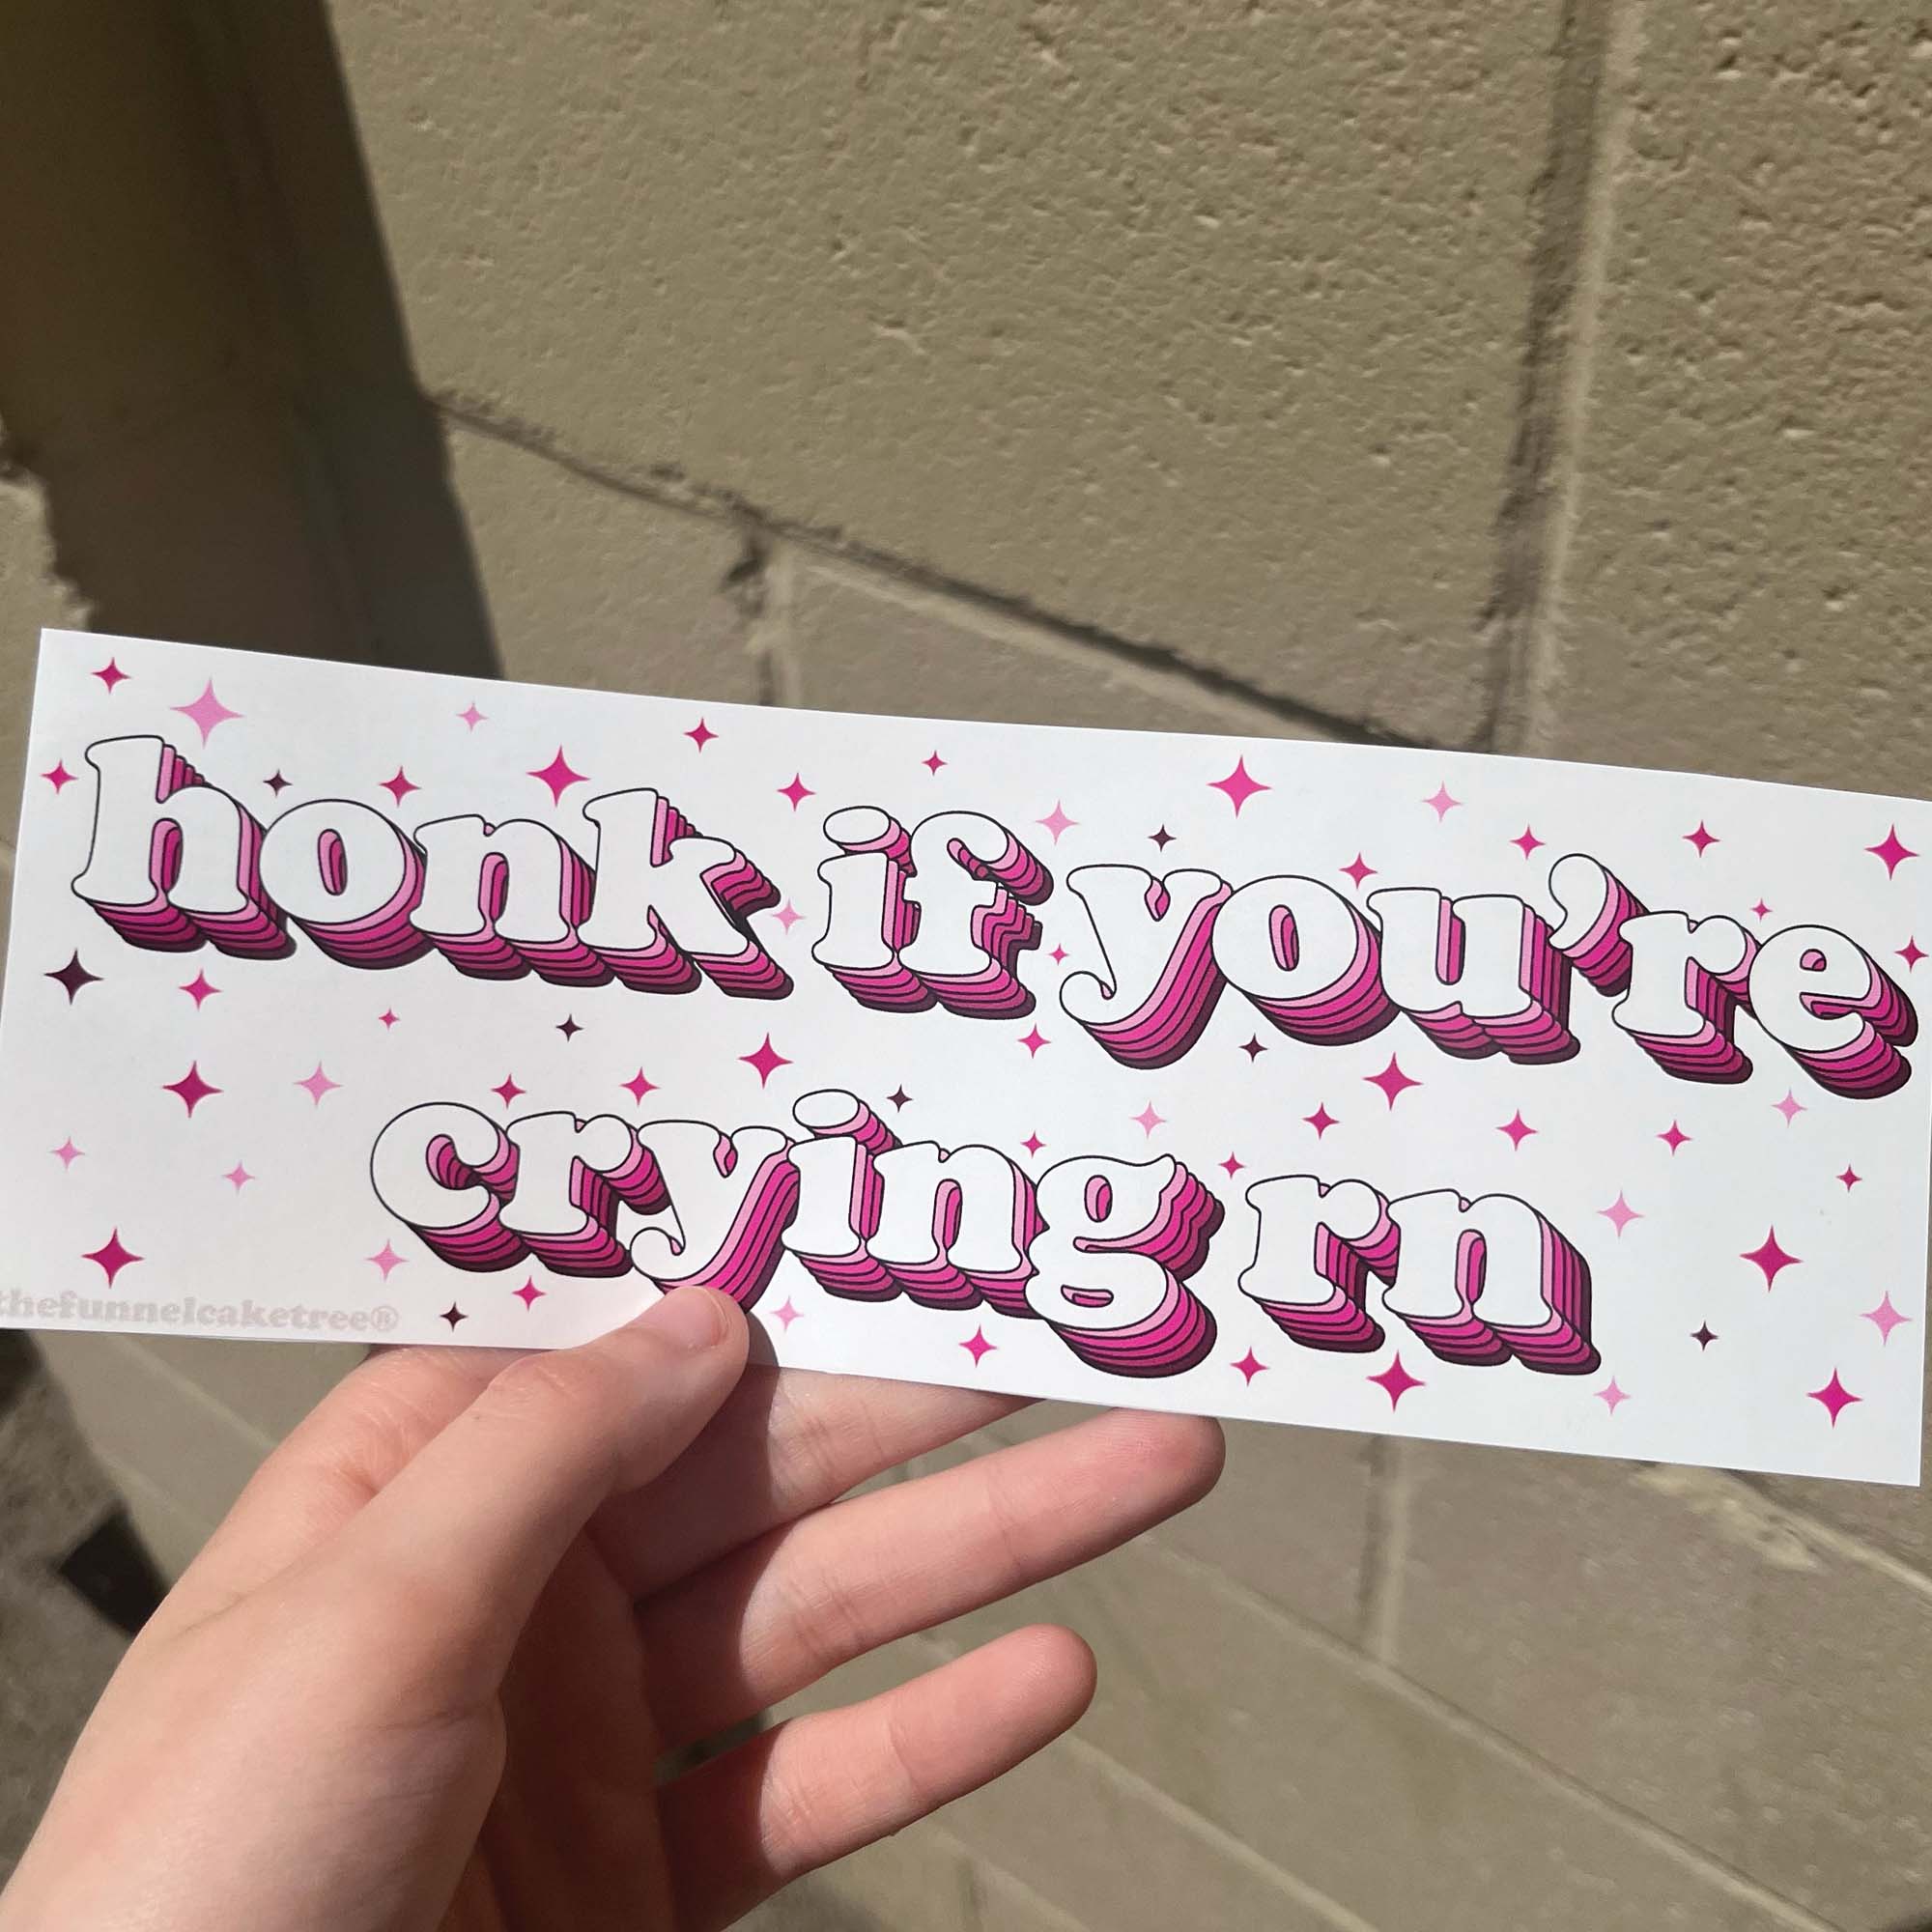 Honk if you’re crying bumper sticker💖